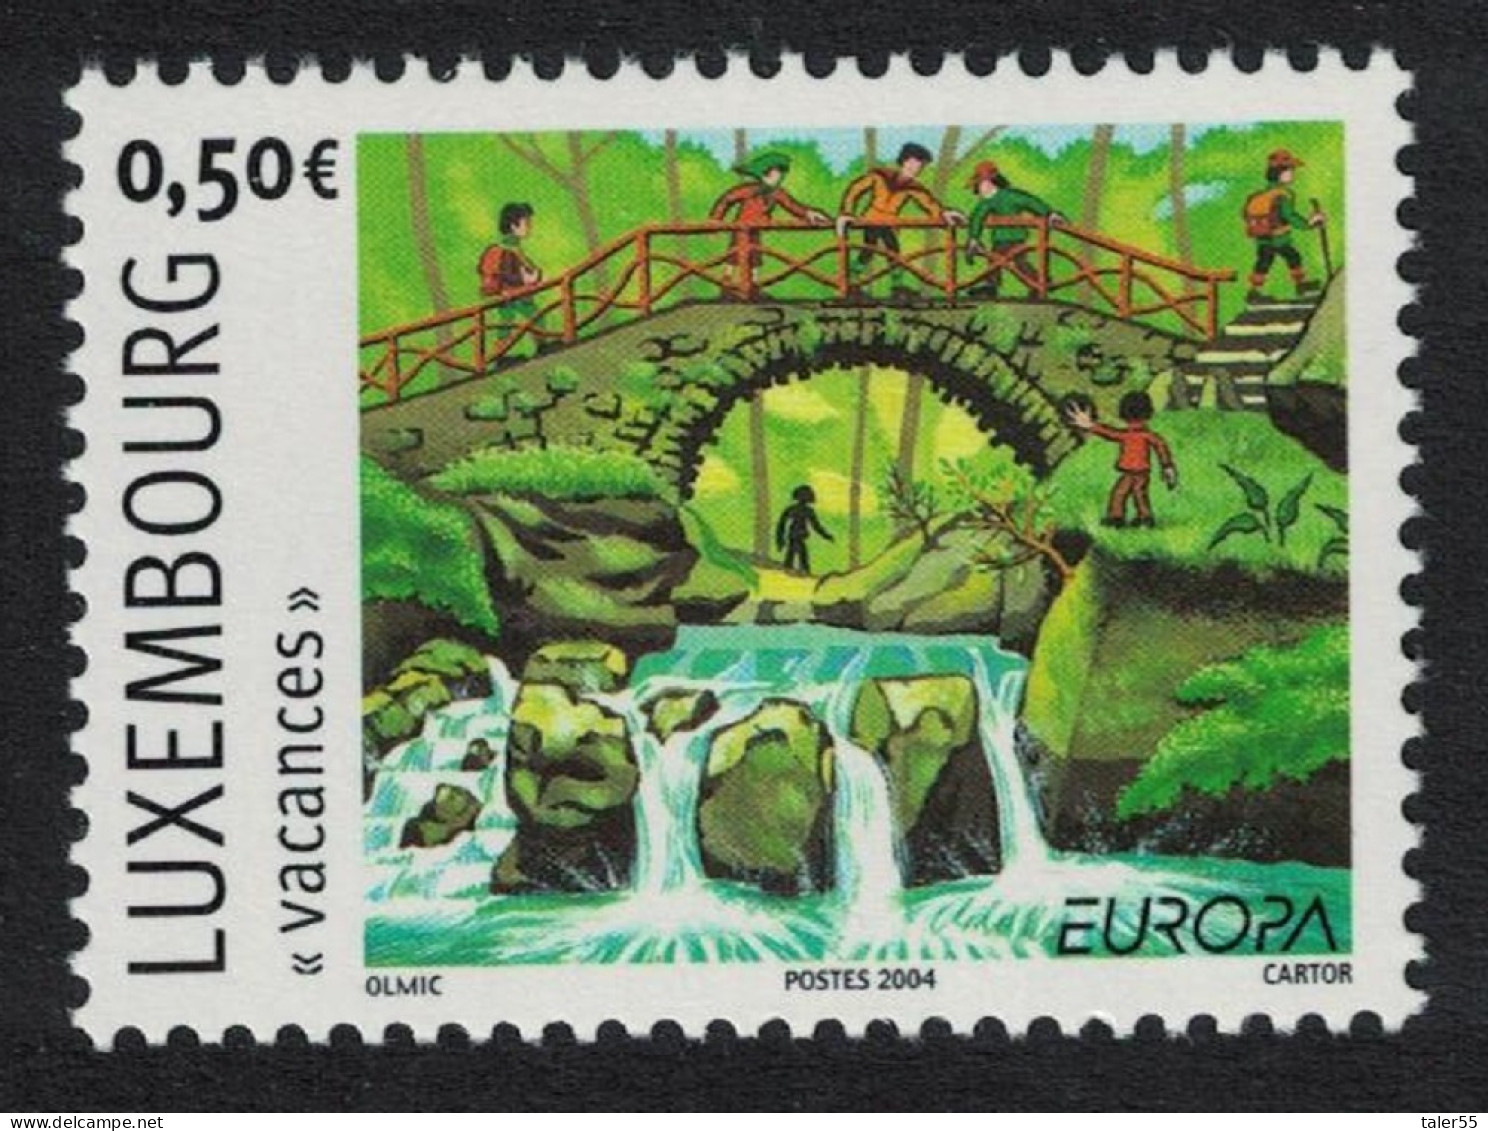 Luxembourg Hikers On Bridge Mullerthal 2004 MNH SG#1675 MI#1640 - Unused Stamps